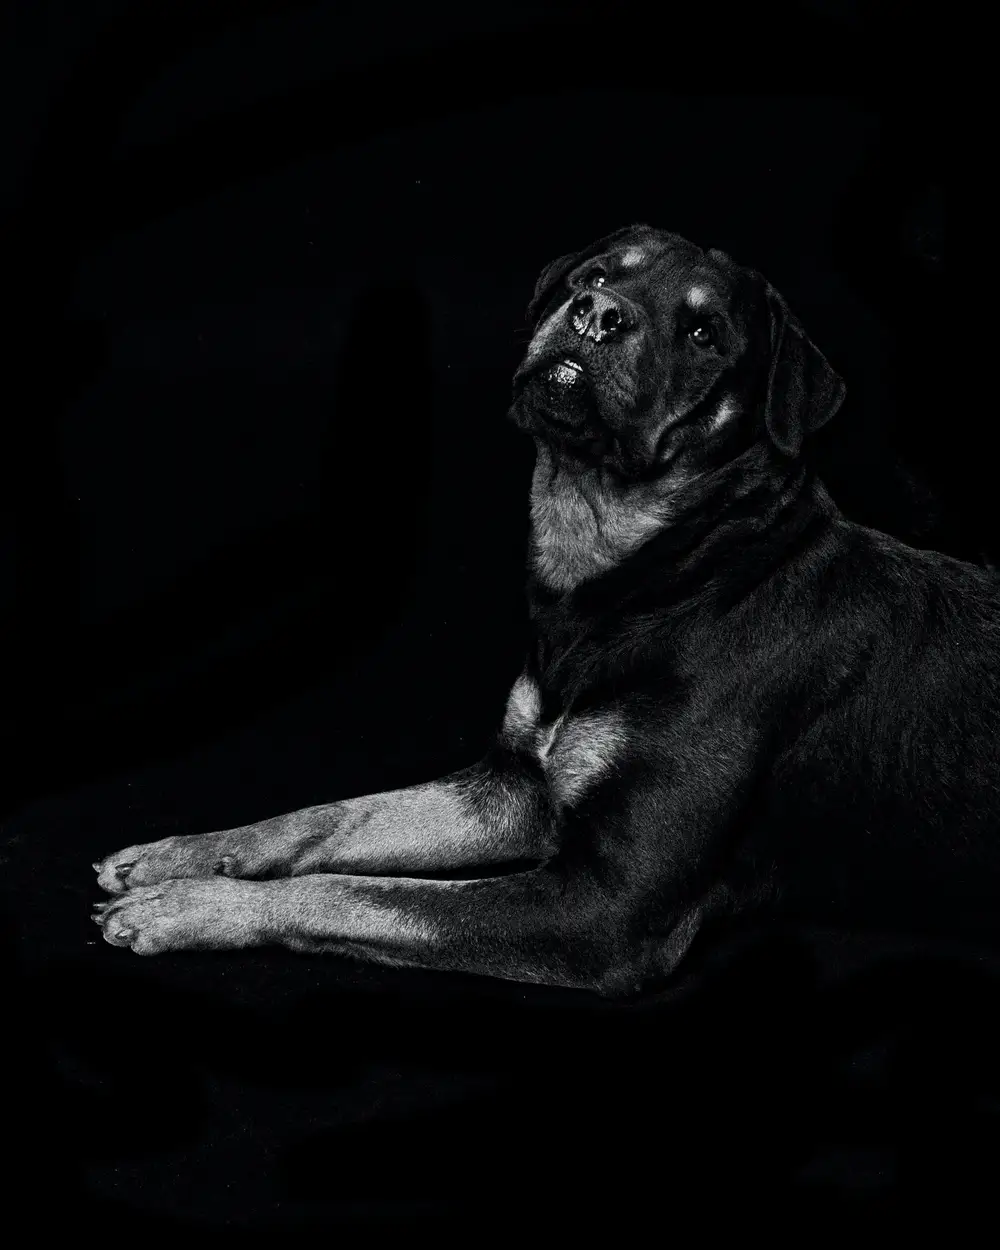 Photo of a dog in black and white